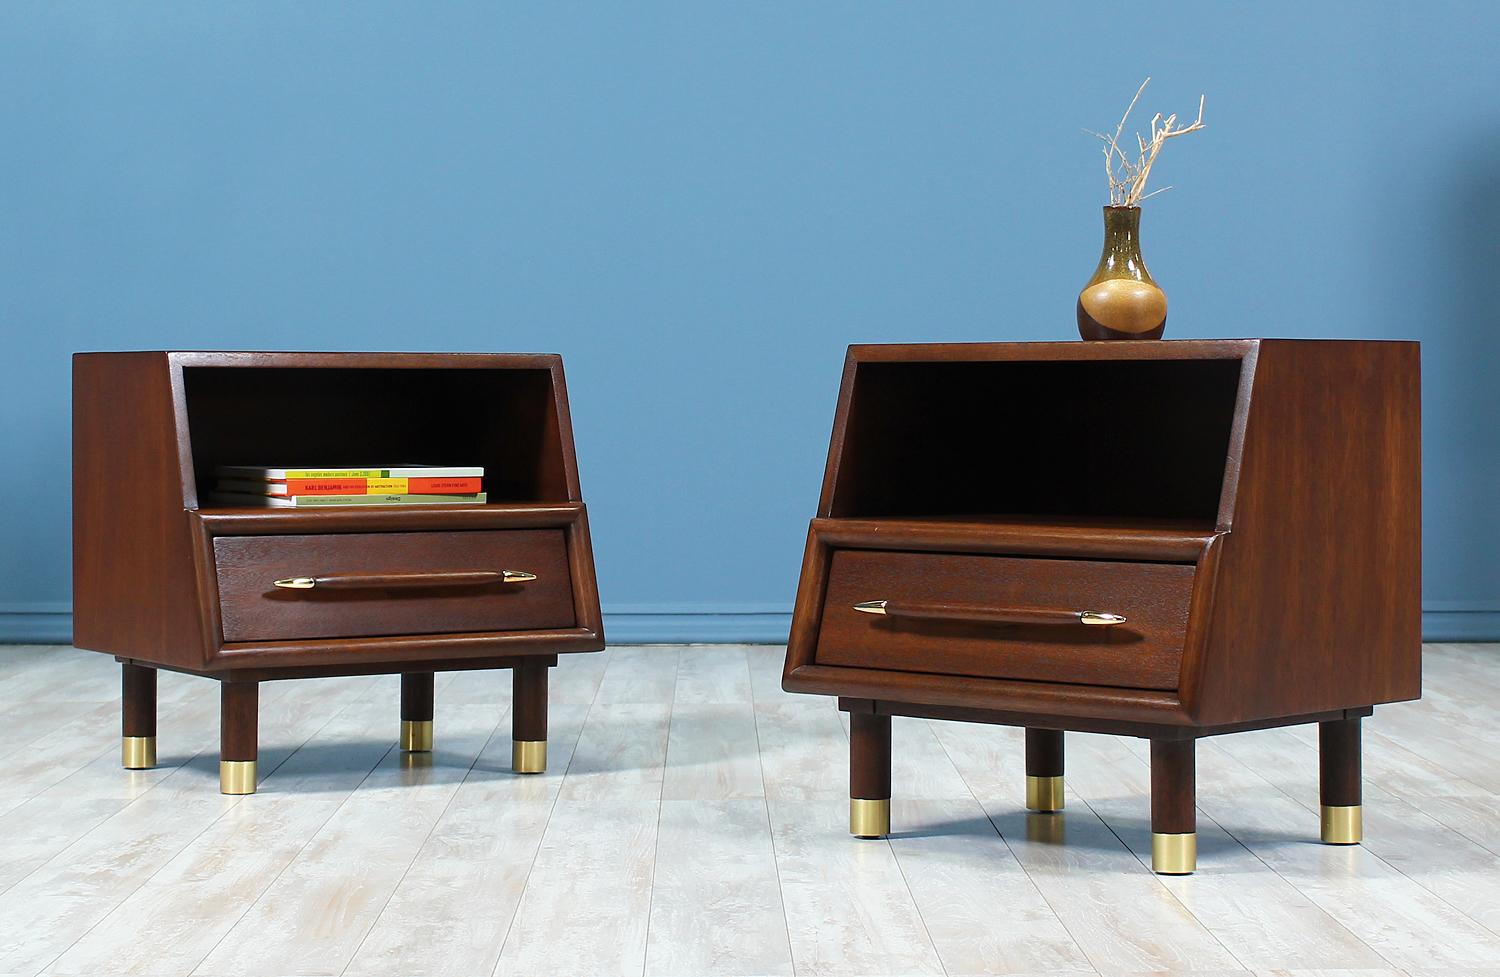 Pair of nightstands designed by John Keal for Brown Saltman in the United States circa 1950’s. This fantastic pair of nightstands are built on solid walnut-stained mahogany wood with beautifully polished brass accents on the leg sabots and the